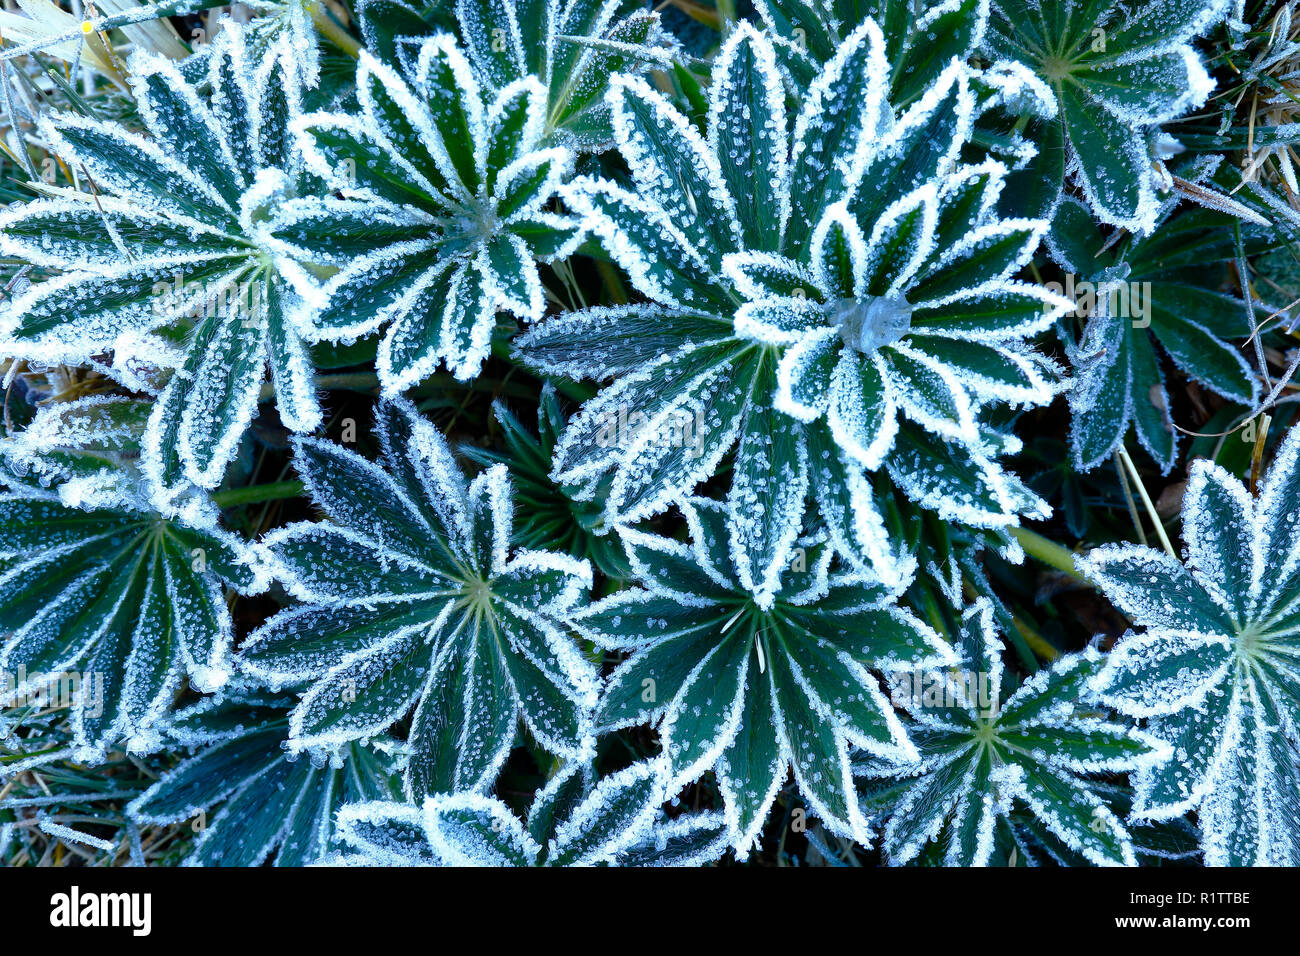 Andean plant (lupinus weberbaueri) recorded in its natural environment at dawn when it is frosted by the extreme cold. Stock Photo